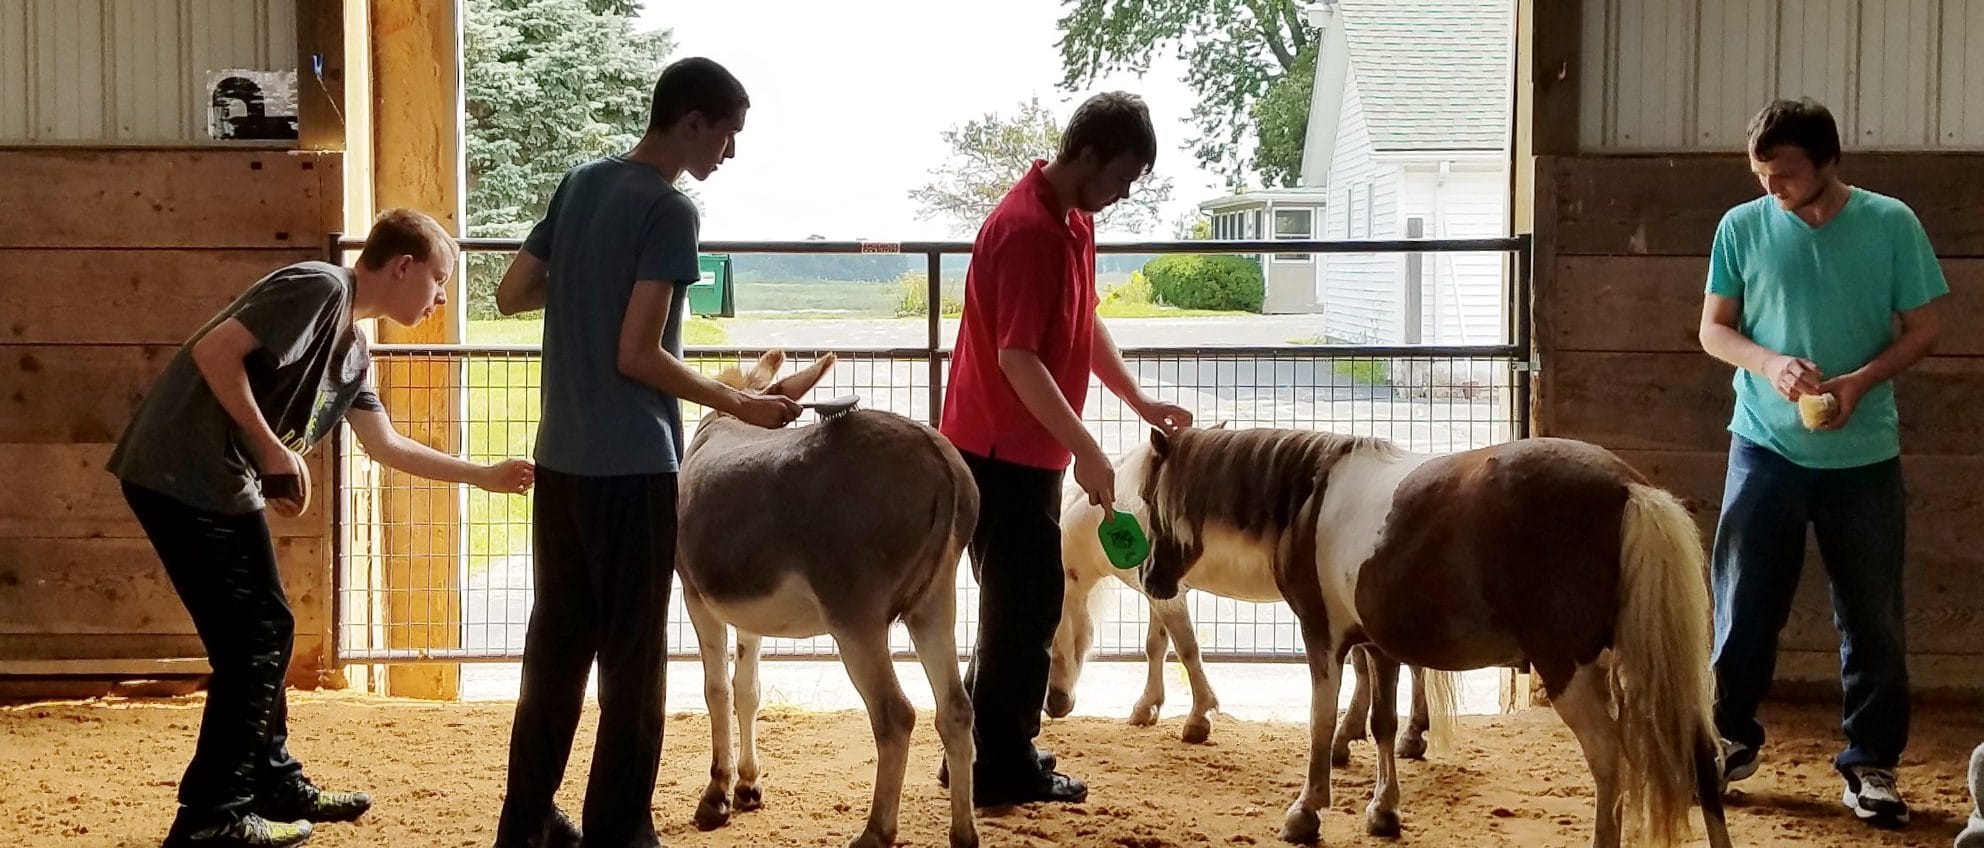 Clients interact with animals in animal assisted learning